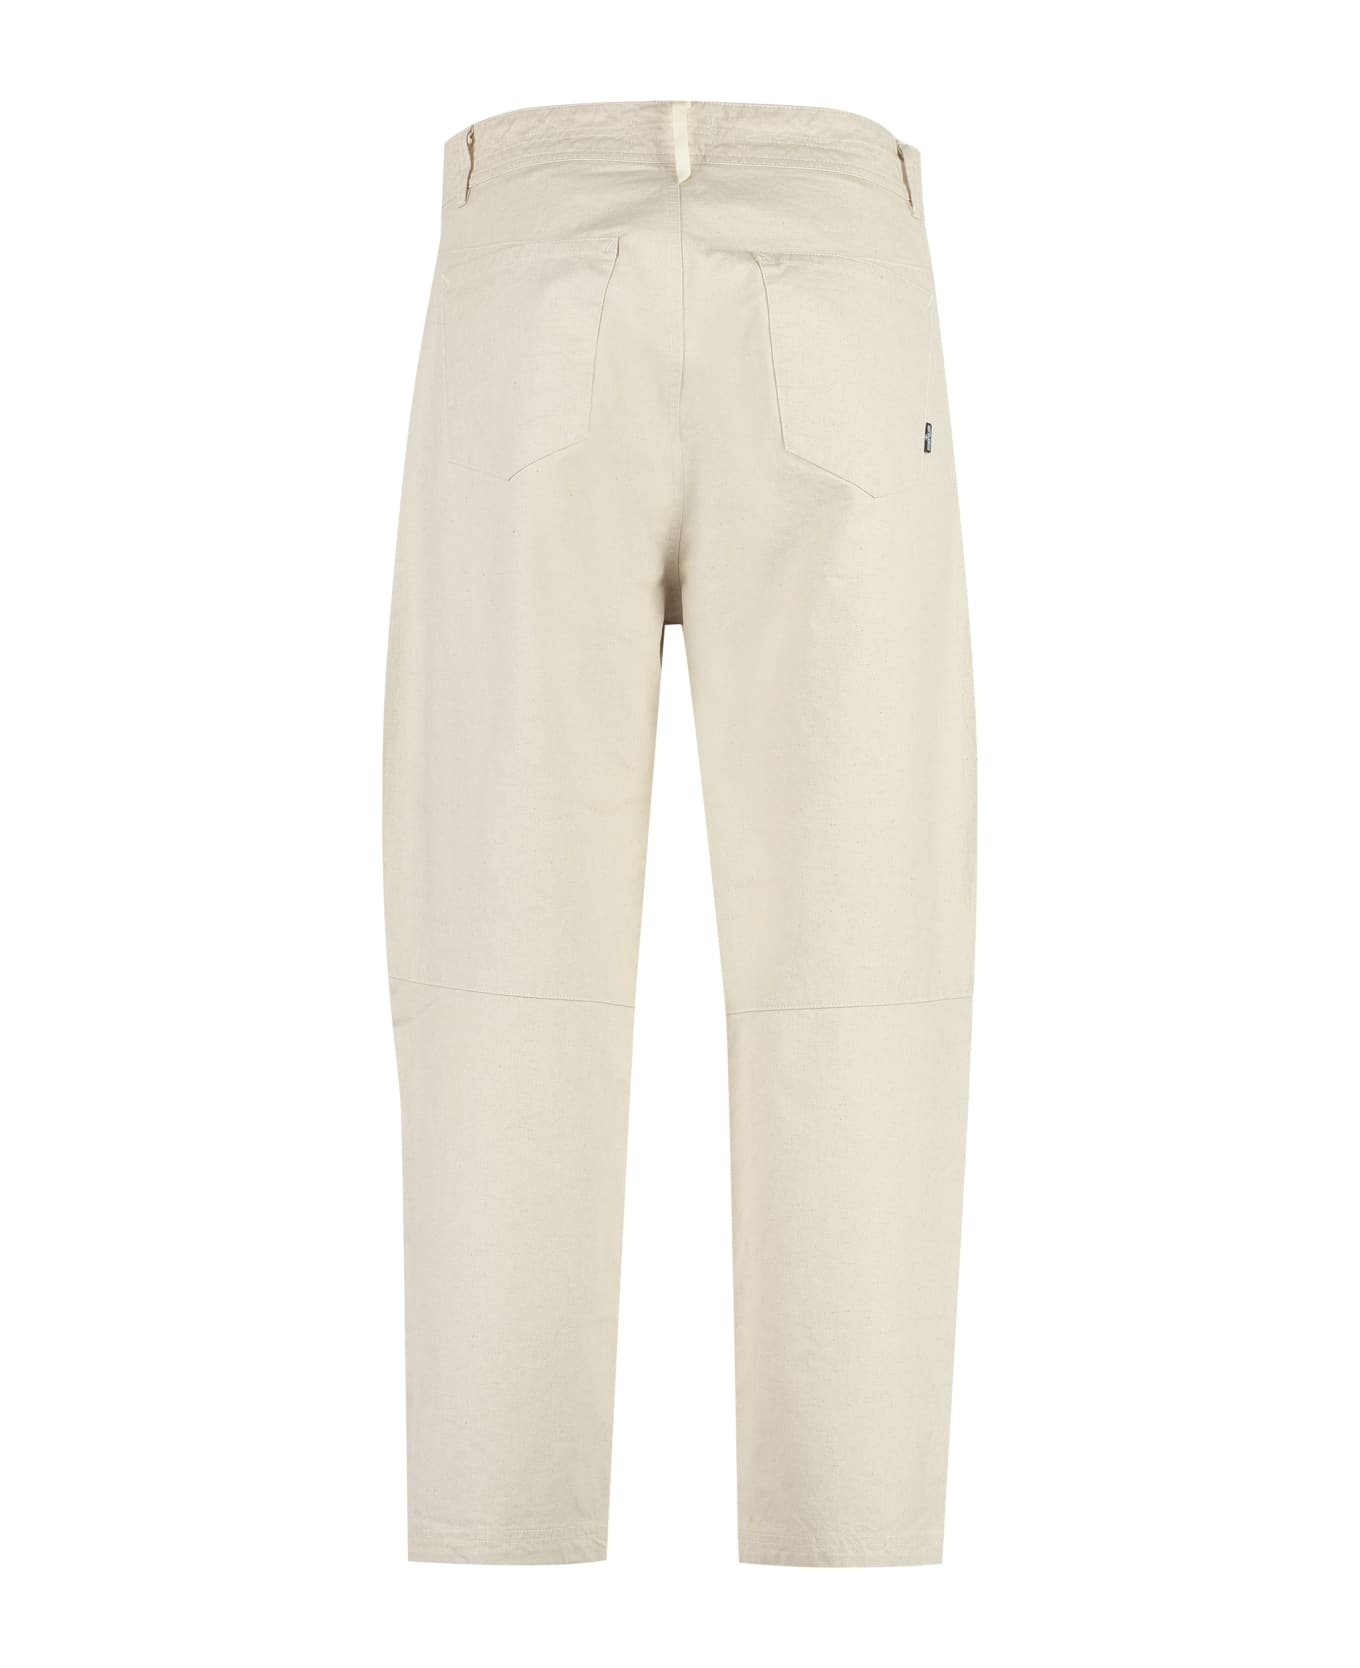 Stone Island Shadow Project Cotton Blend Trousers - Sand